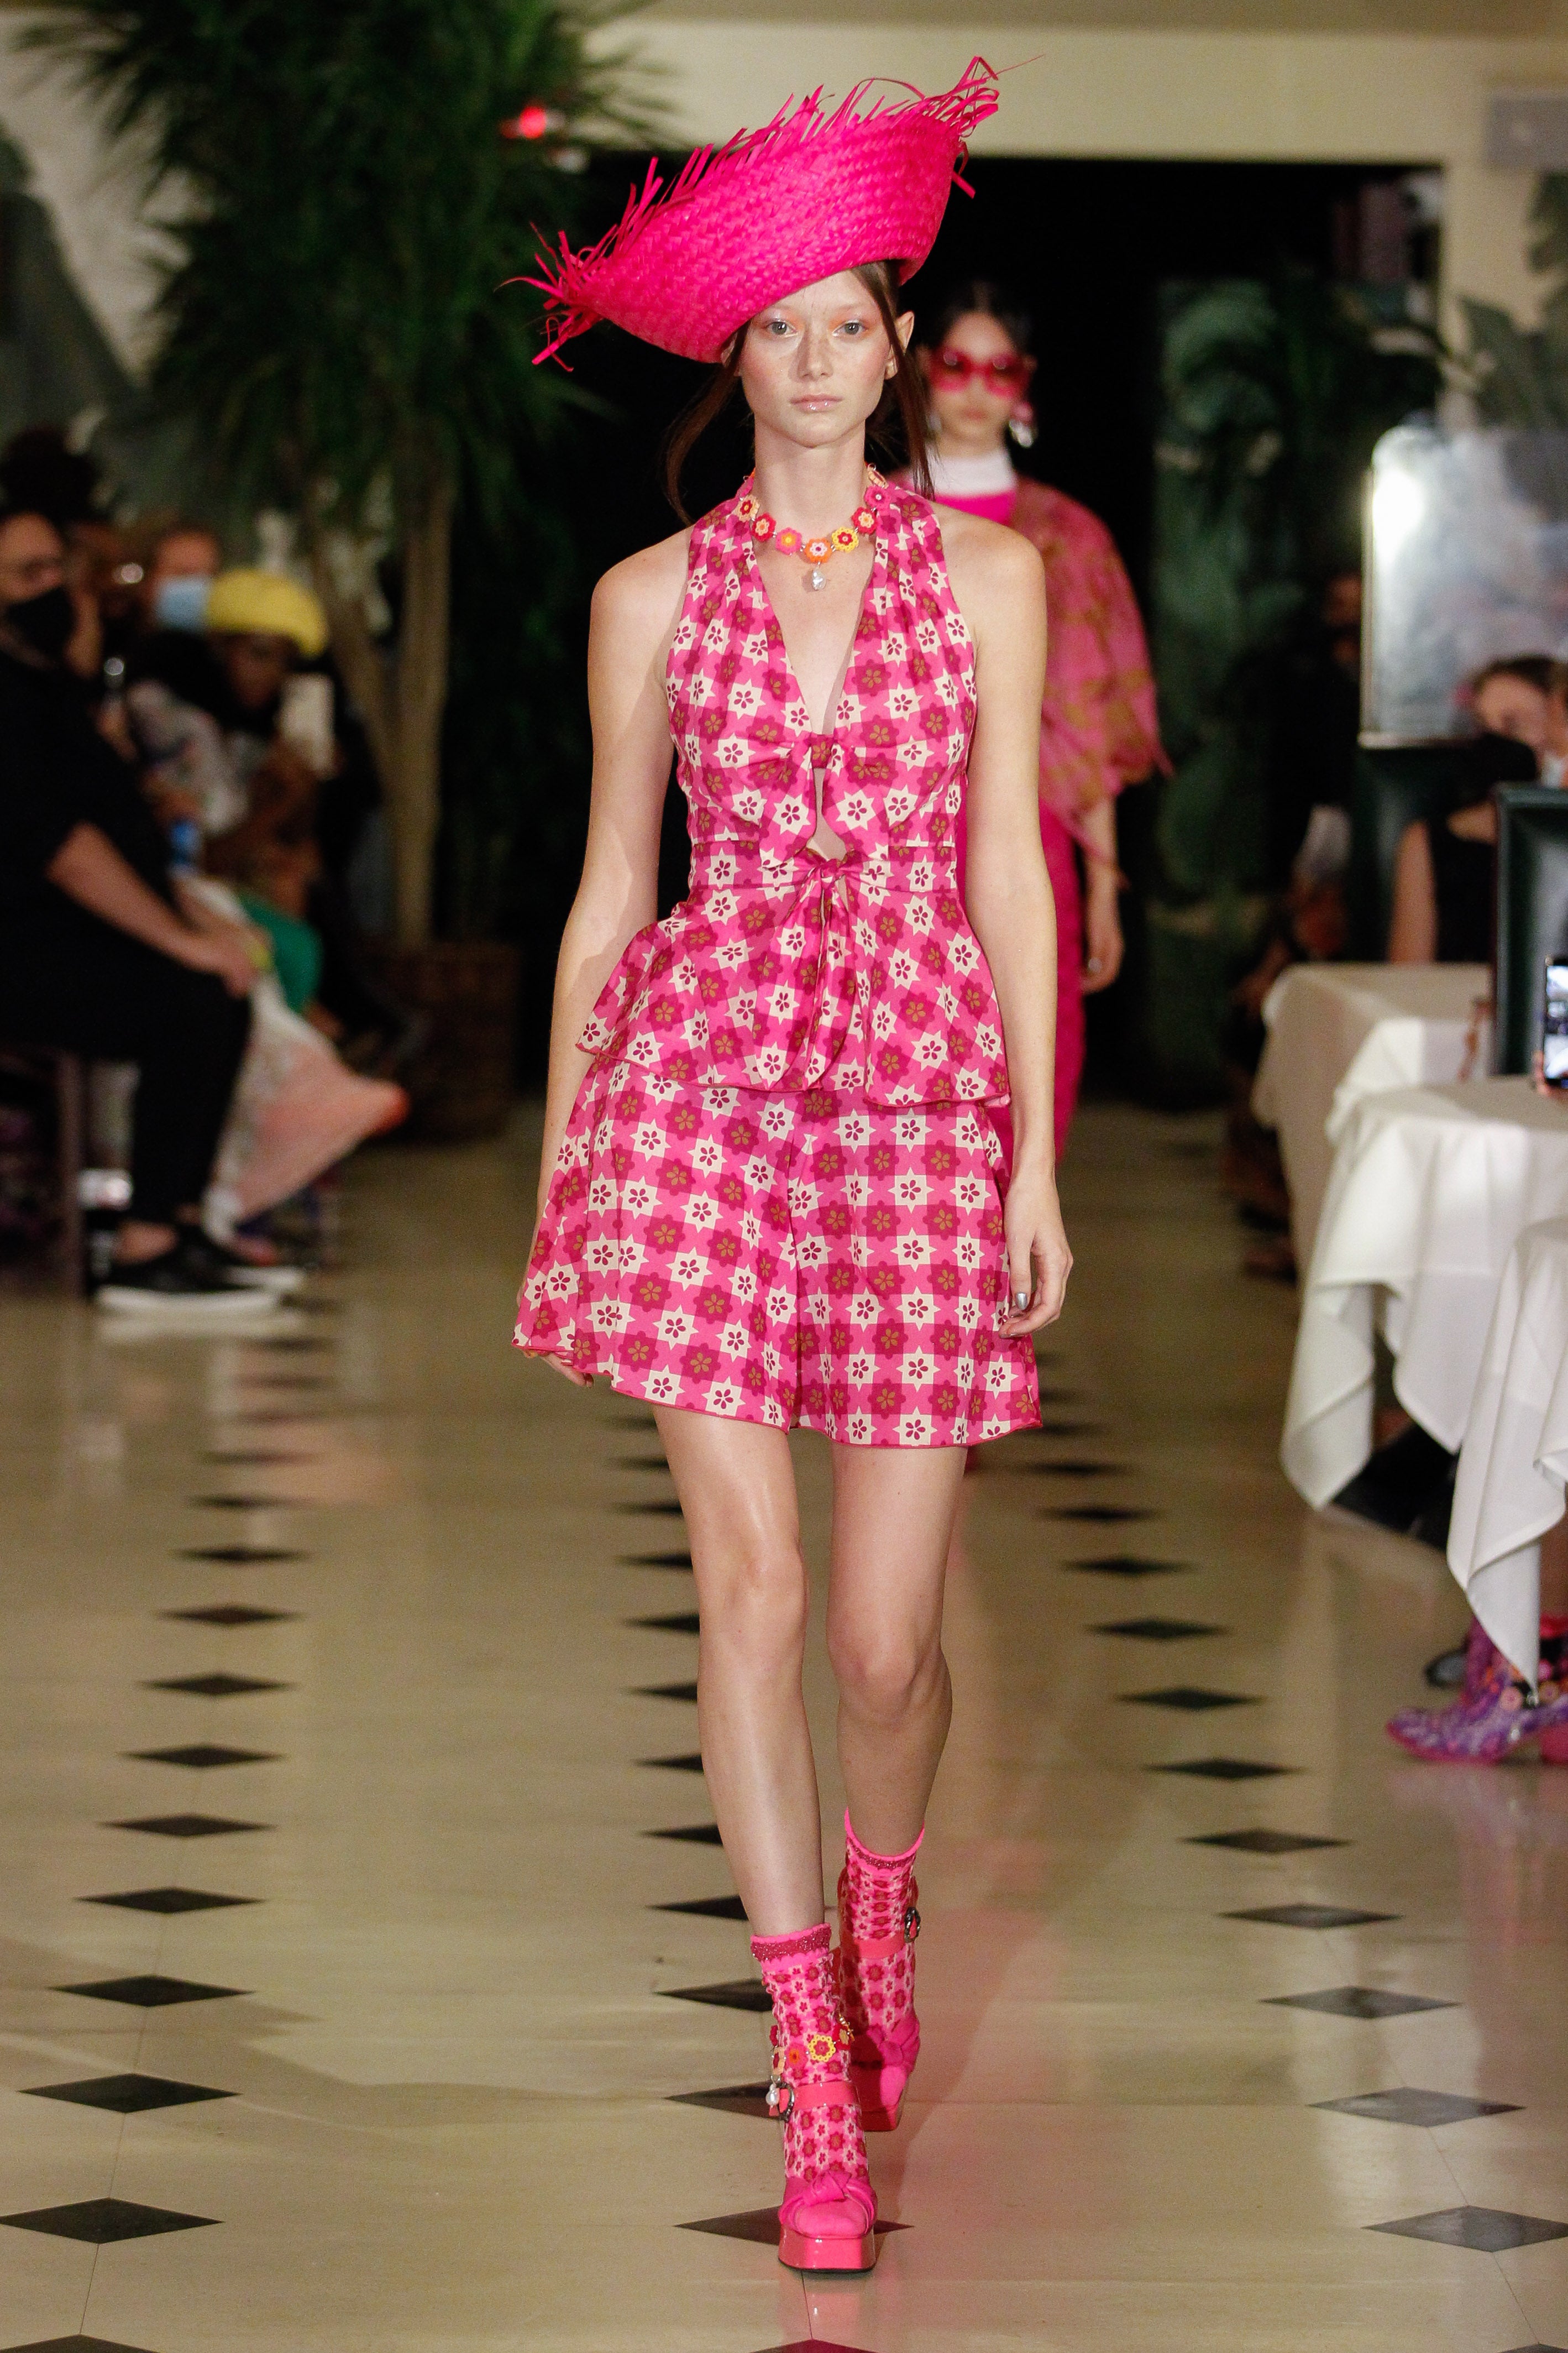 Utopian Gingham Halter Top Pink, hips high with ruffle effect, V-neck, tying leaves a gap between the breasts